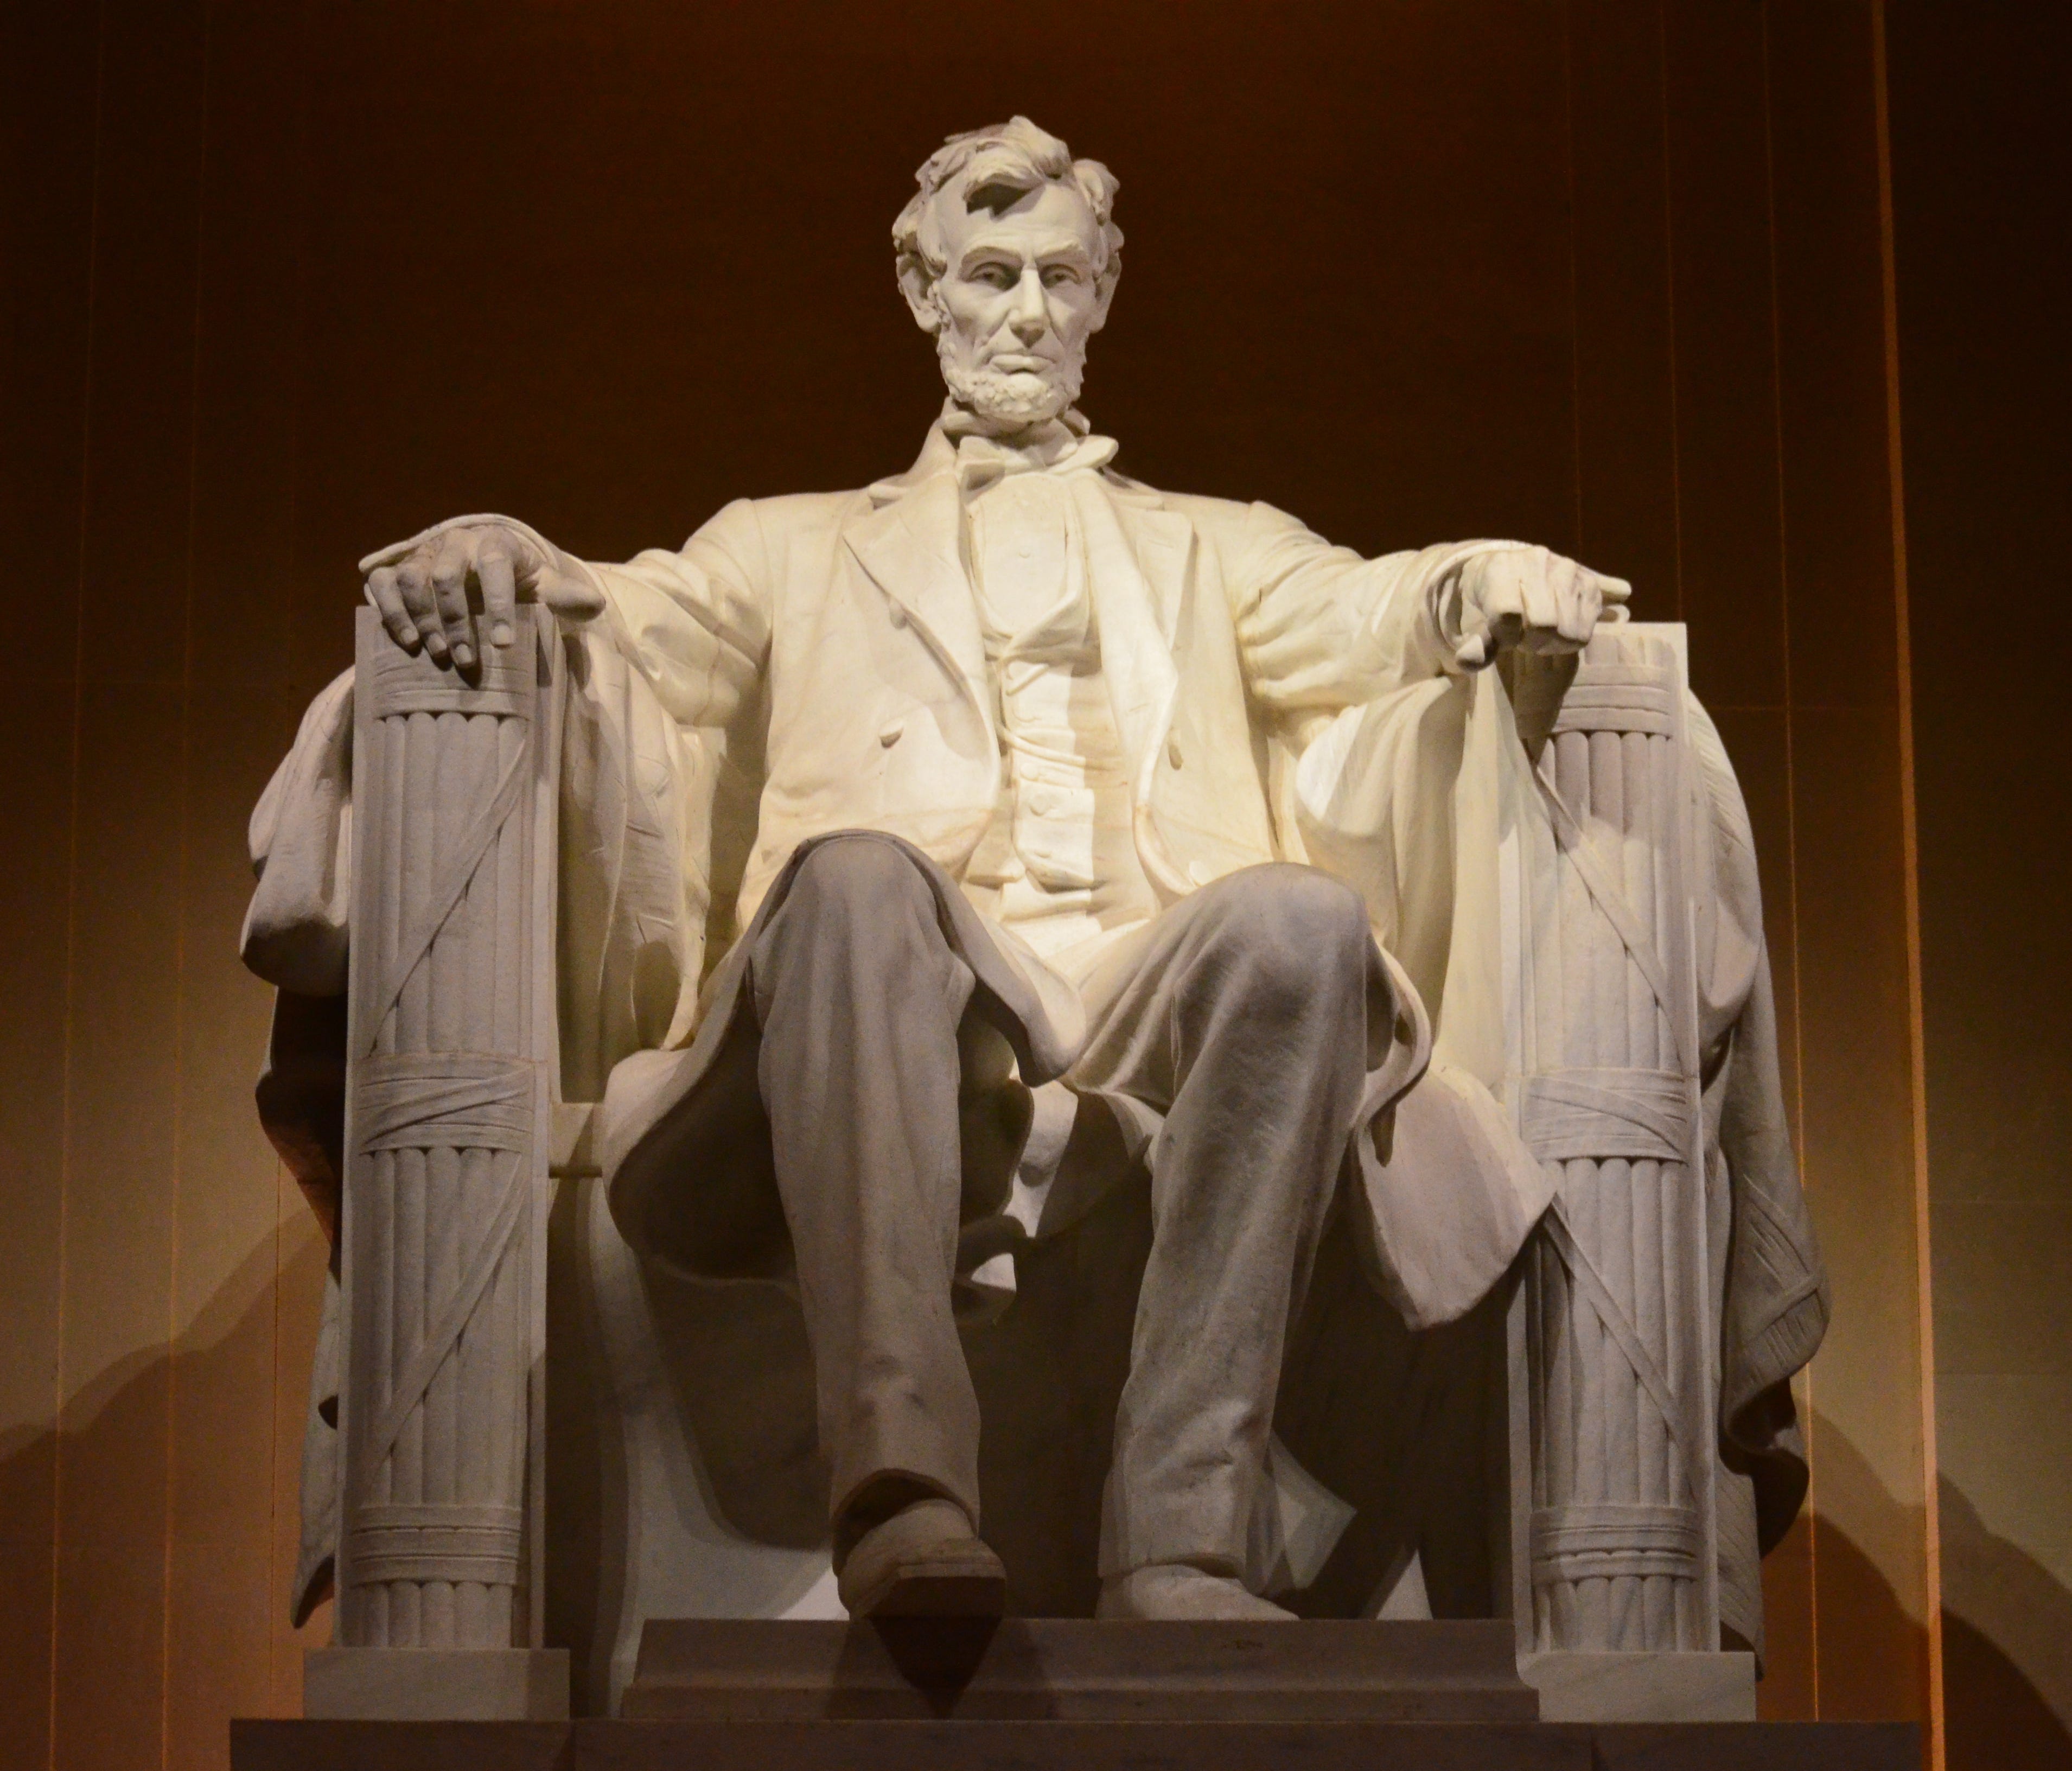 5. Lincoln Memorial – 7,956,117: At the west end of the National Mall in Washington, D.C., the Lincoln Memorial stands in tribute to President Abraham Lincoln. Modeled after the Parthenon in Greece (the birthplace of democracy), the Lincoln Memorial 